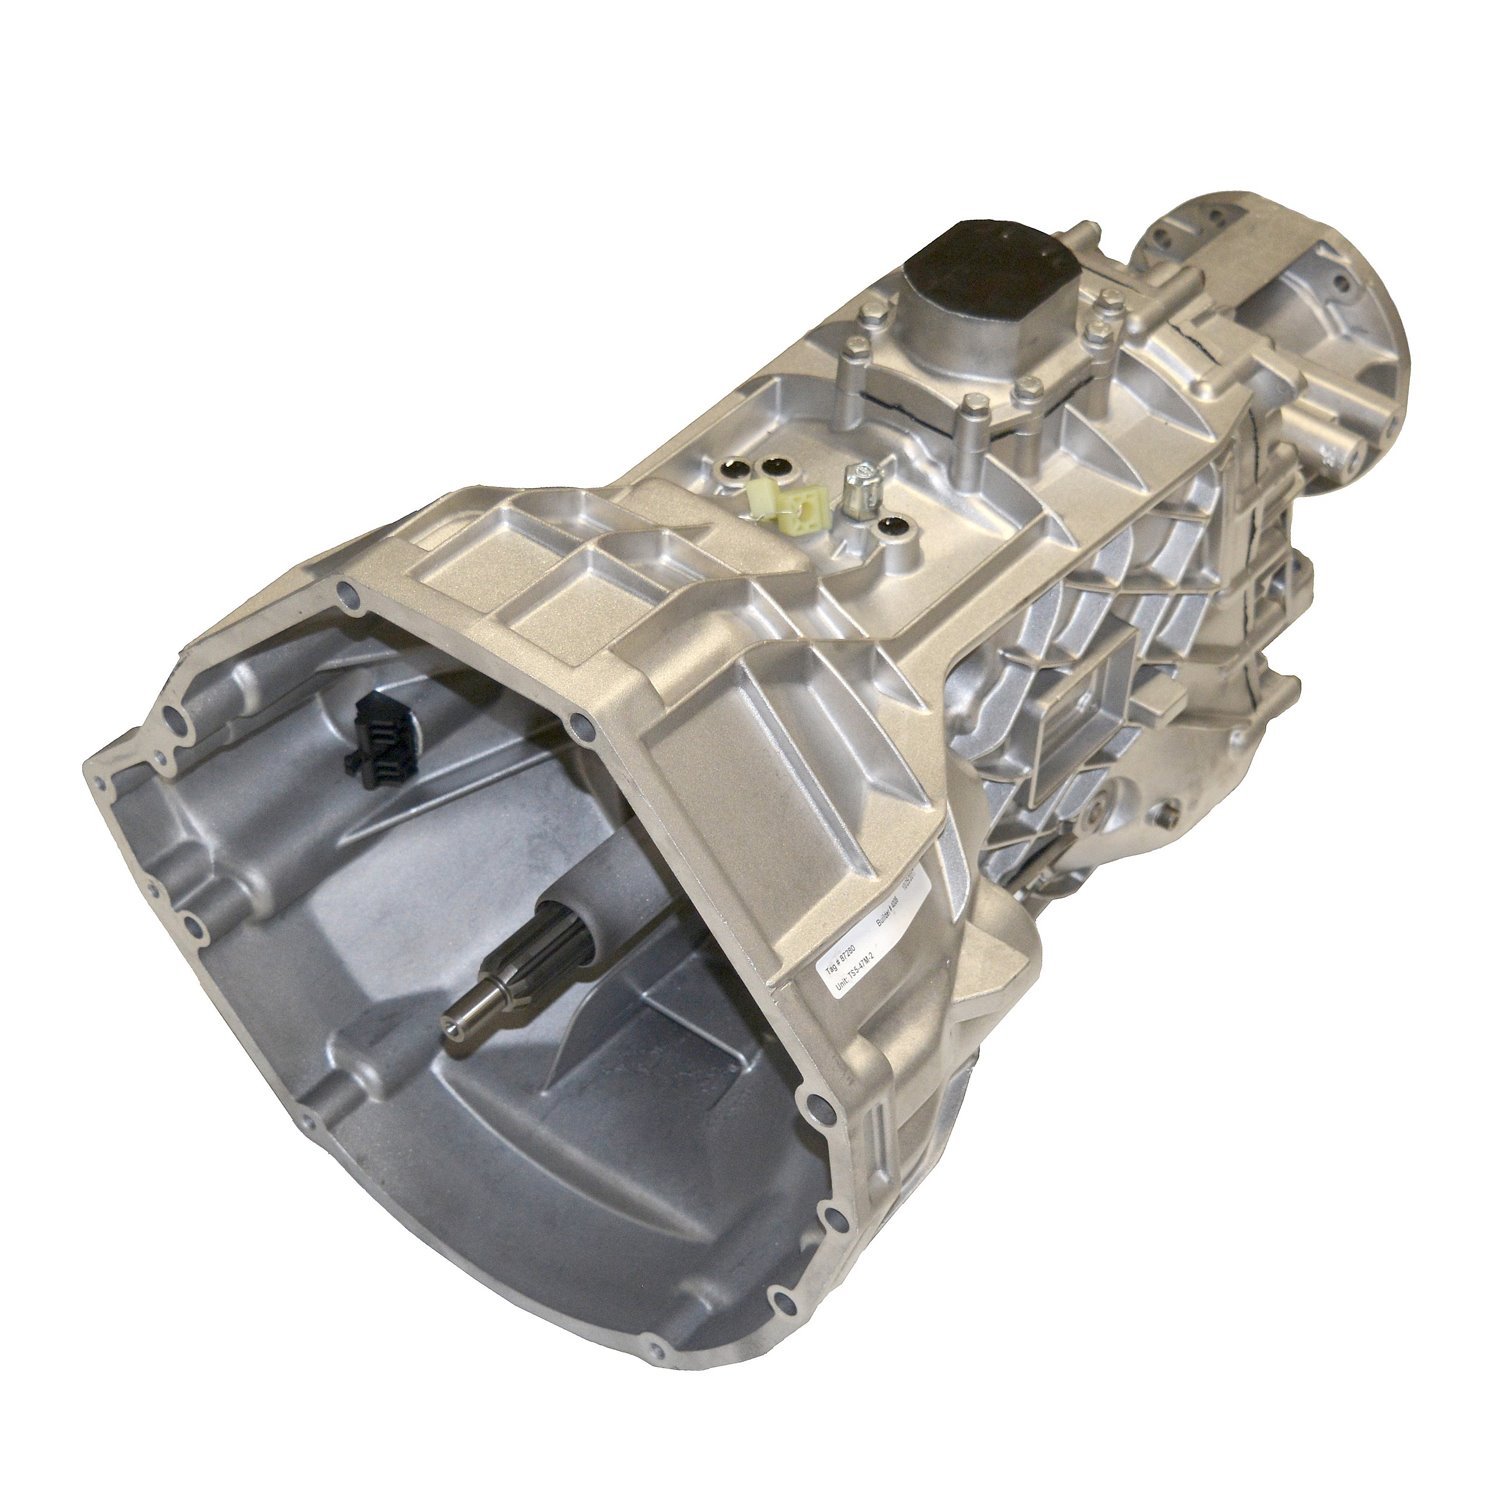 Remanufactured S5-47 Manual Transmission for Ford 99-01 F-series 5.4L & 6.8L, 4x4, 5 Speed